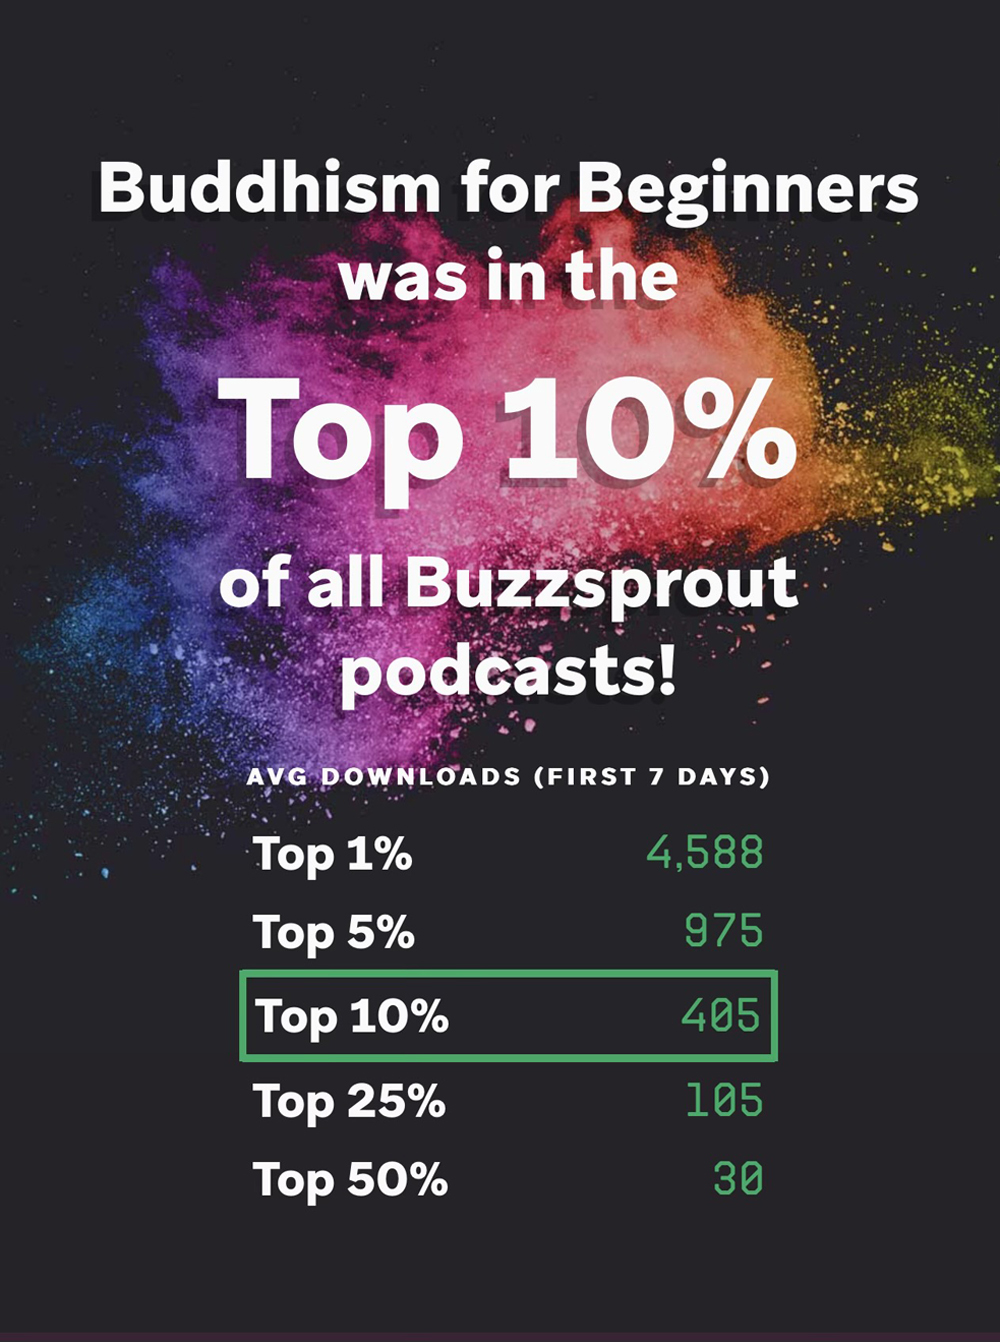 Buddhism podcast in top 10%